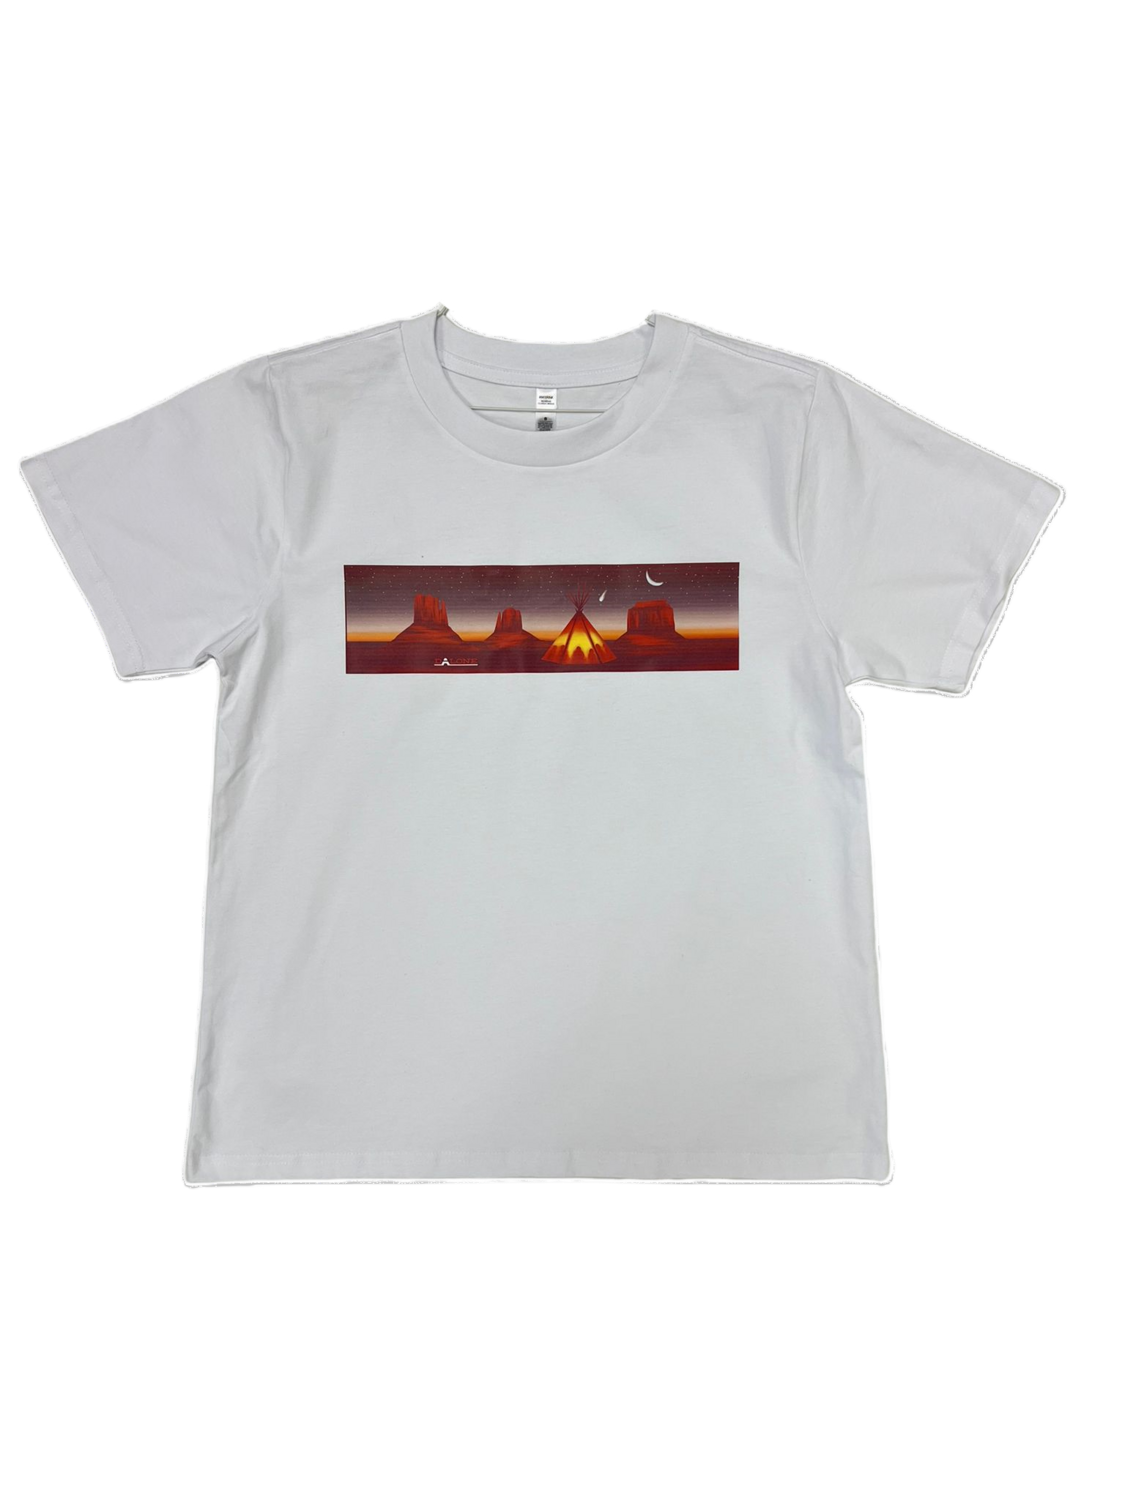 DALONE Monument Valley T-Shirt